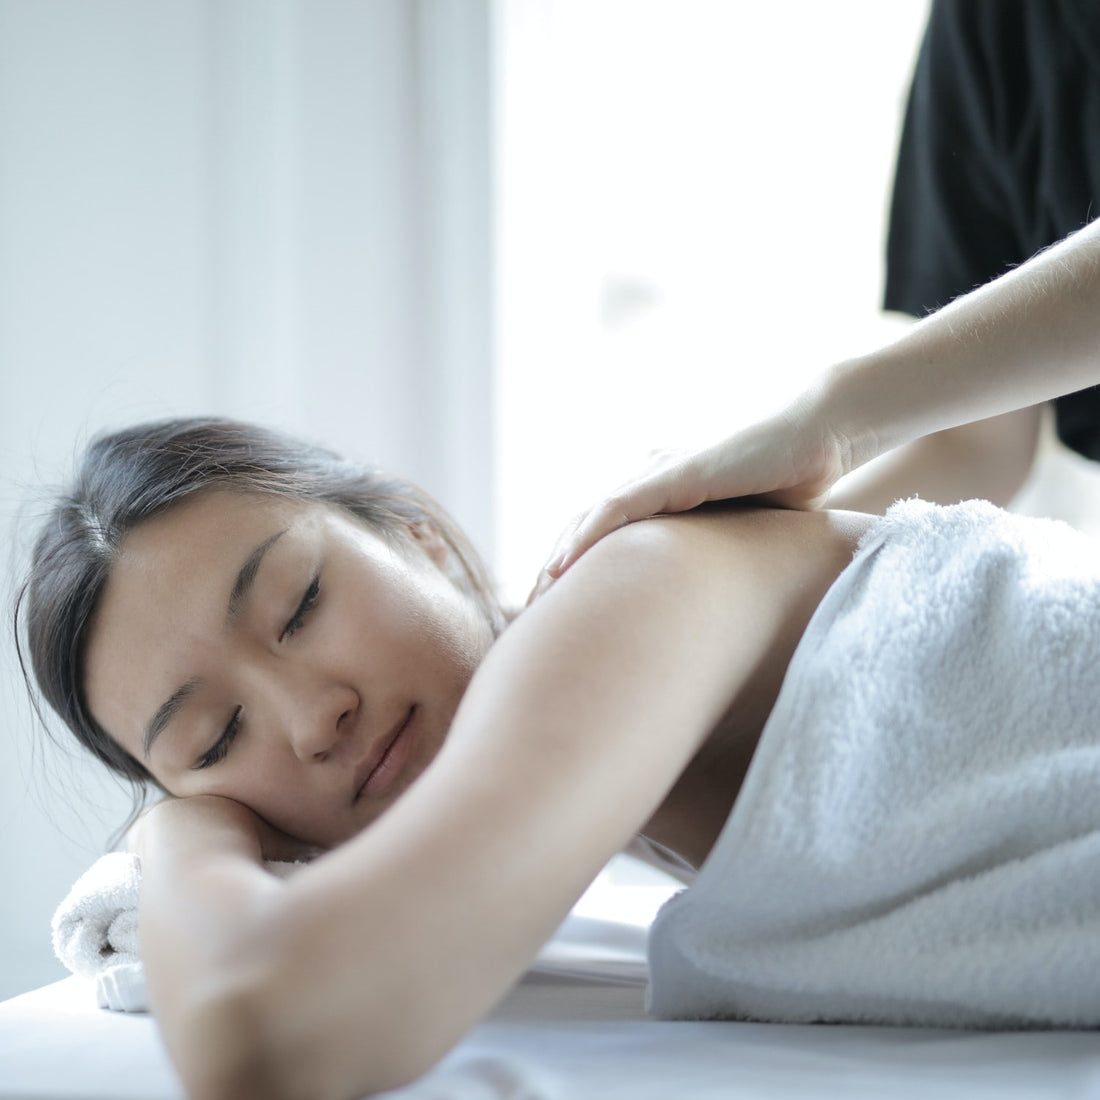 how to get a great full body massage at home